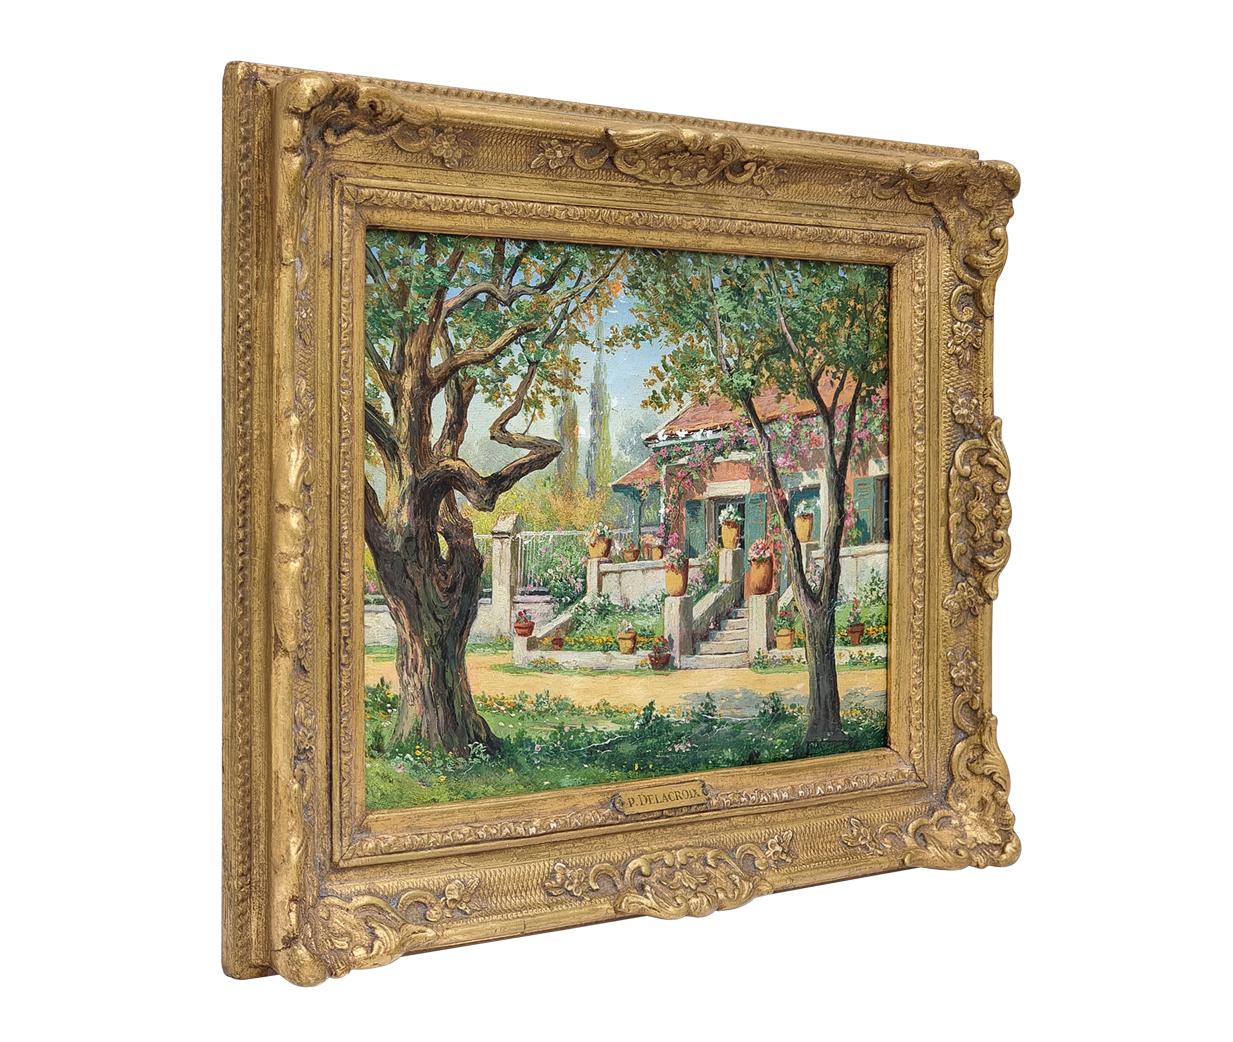 Small flower-filled house in the south of France with terrace and wooded garden. Oil on canvas painted by the French artist Pauline Delacroix-Garnier (1859 - 1912) framed in an antique Louis XIV-style gilded shell frame. A copper cartel signed 